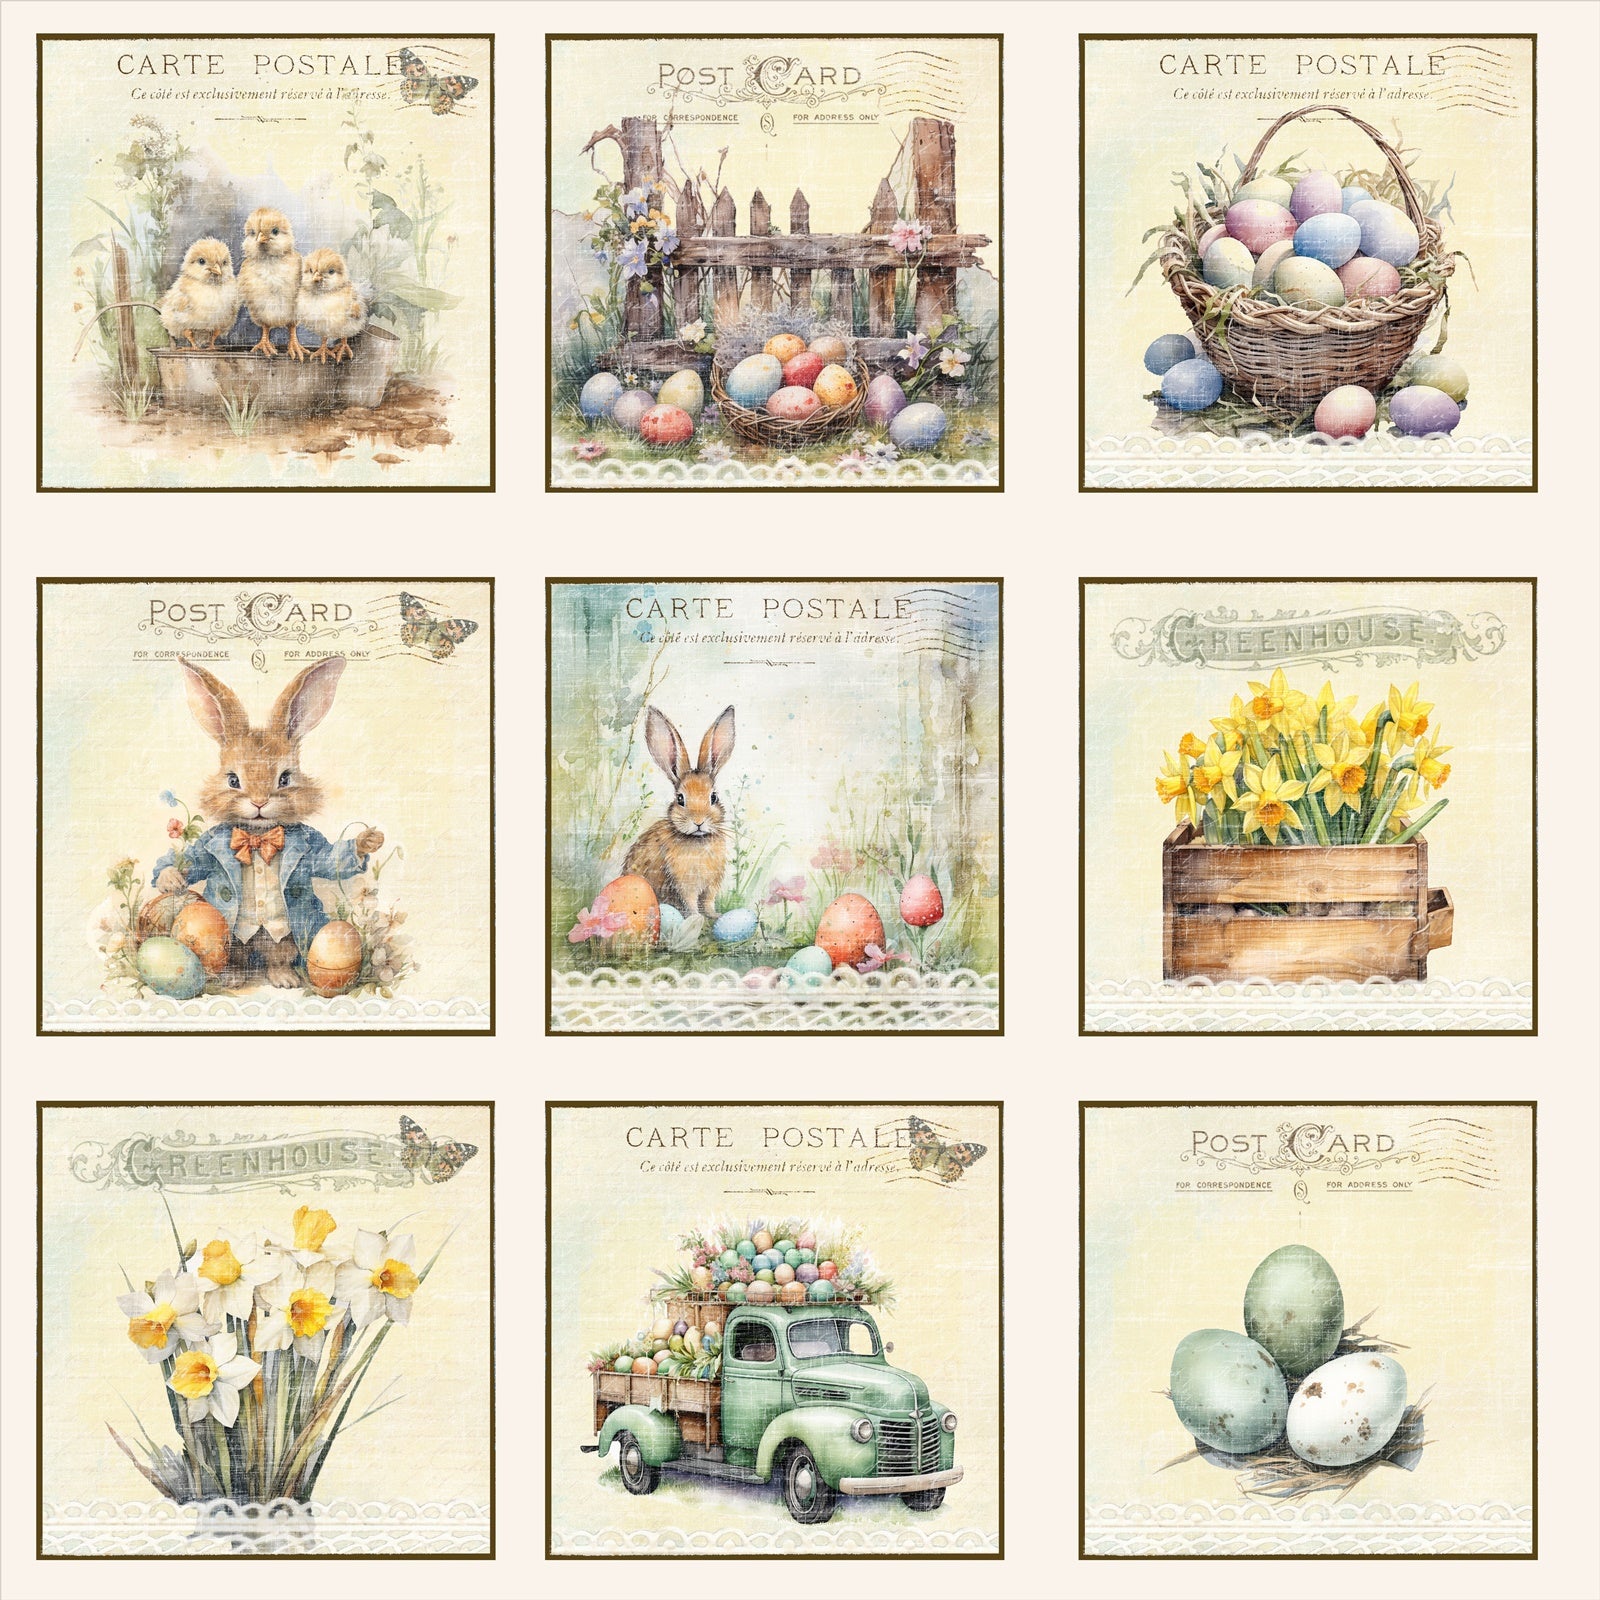 Reprint - Easter Collection Pack - 12 x 12"